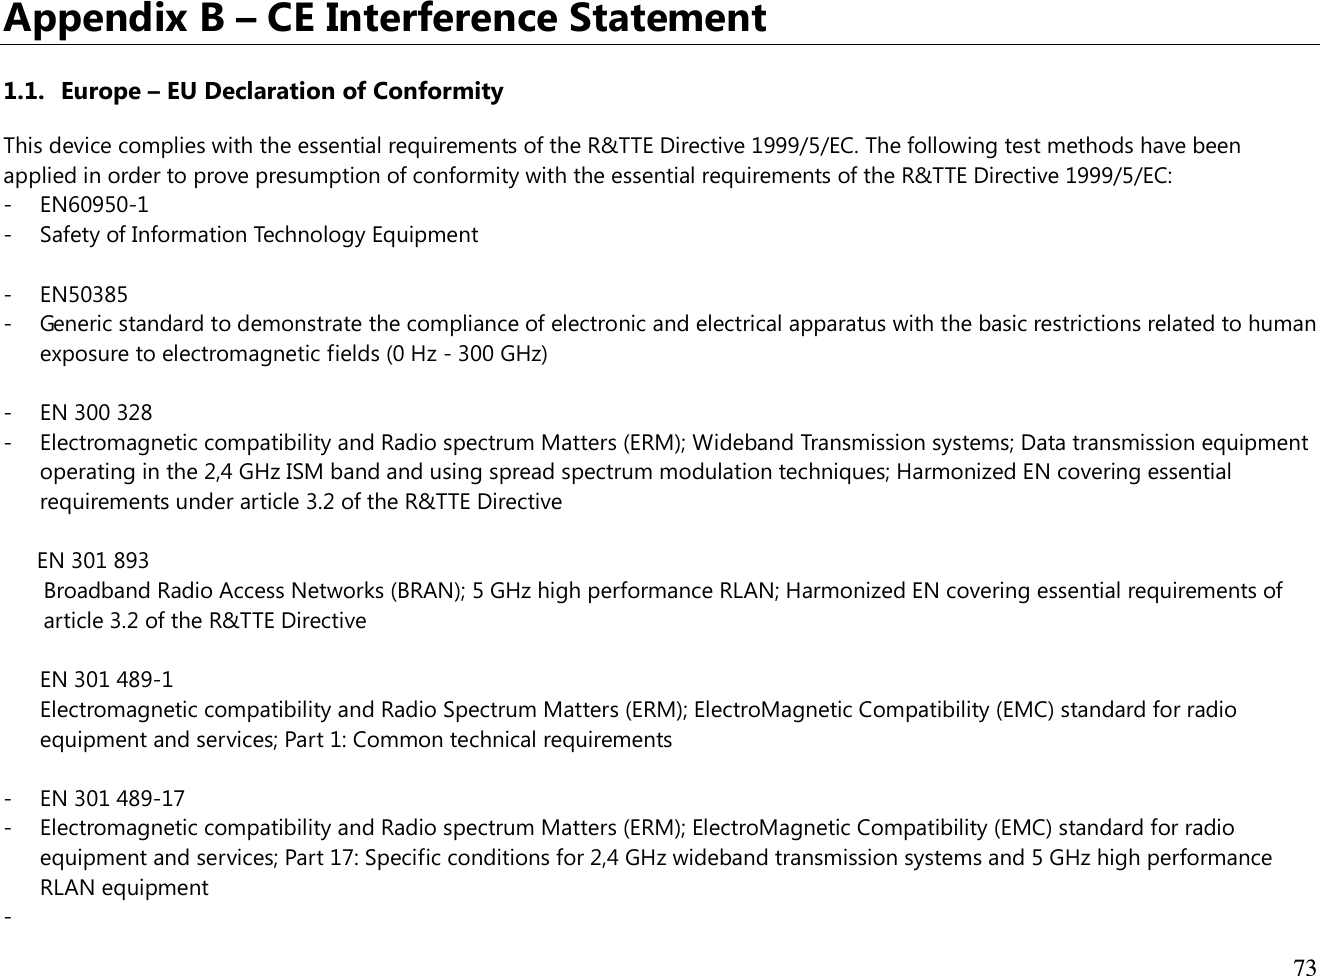  73  Appendix B – CE Interference Statement  1.1. Europe – EU Declaration of Conformity This device complies with the essential requirements of the R&amp;TTE Directive 1999/5/EC. The following test methods have been applied in order to prove presumption of conformity with the essential requirements of the R&amp;TTE Directive 1999/5/EC: - EN60950-1 - Safety of Information Technology Equipment  - EN50385 - Generic standard to demonstrate the compliance of electronic and electrical apparatus with the basic restrictions related to human exposure to electromagnetic fields (0 Hz - 300 GHz)  - EN 300 328 - Electromagnetic compatibility and Radio spectrum Matters (ERM); Wideband Transmission systems; Data transmission equipment operating in the 2,4 GHz ISM band and using spread spectrum modulation techniques; Harmonized EN covering essential requirements under article 3.2 of the R&amp;TTE Directive  EN 301 893  Broadband Radio Access Networks (BRAN); 5 GHz high performance RLAN; Harmonized EN covering essential requirements of article 3.2 of the R&amp;TTE Directive  EN 301 489-1  Electromagnetic compatibility and Radio Spectrum Matters (ERM); ElectroMagnetic Compatibility (EMC) standard for radio equipment and services; Part 1: Common technical requirements  - EN 301 489-17 - Electromagnetic compatibility and Radio spectrum Matters (ERM); ElectroMagnetic Compatibility (EMC) standard for radio equipment and services; Part 17: Specific conditions for 2,4 GHz wideband transmission systems and 5 GHz high performance RLAN equipment -  